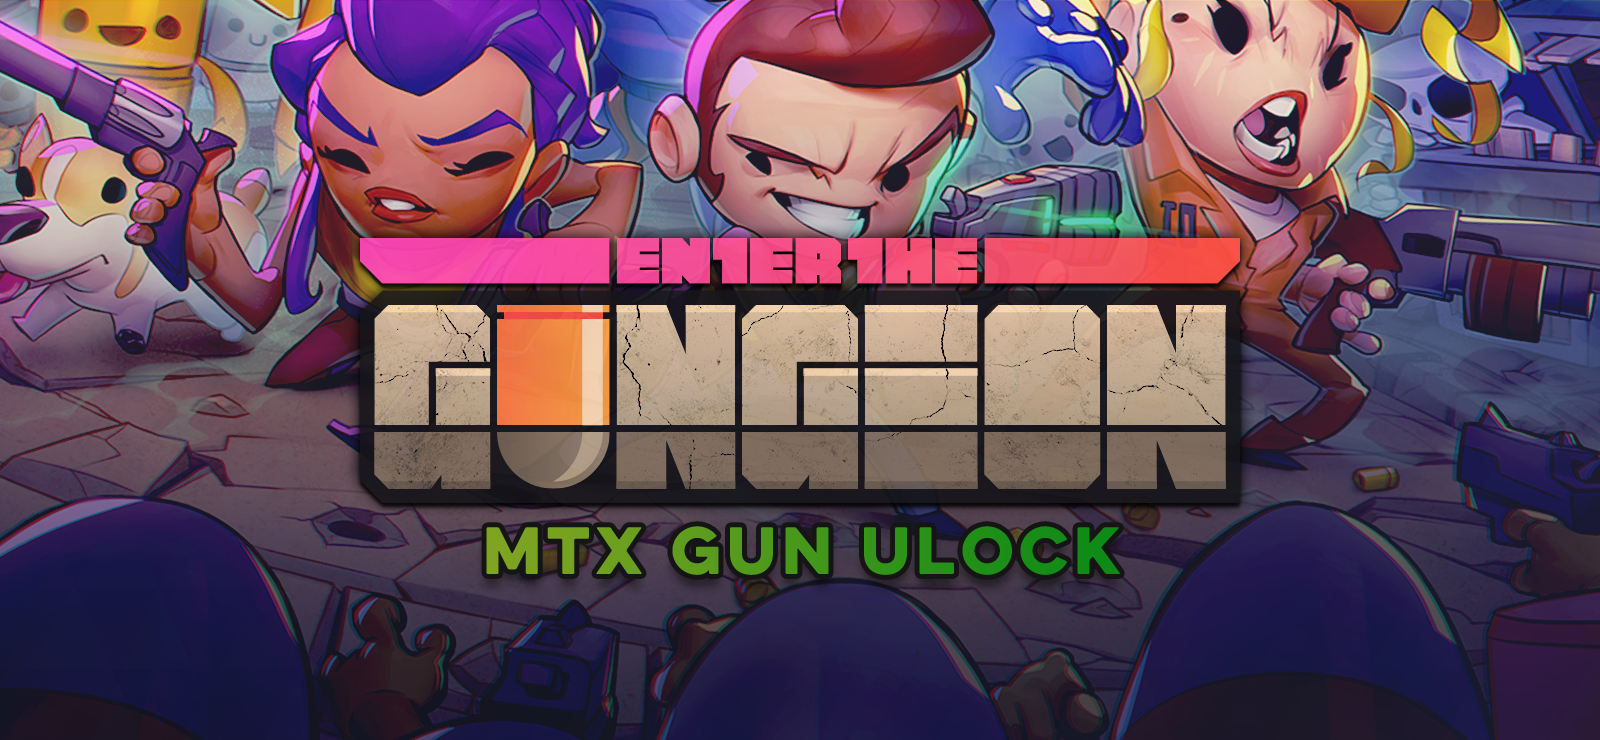 Enter the Gungeon Collector's Edition Upgrade on GOG.com